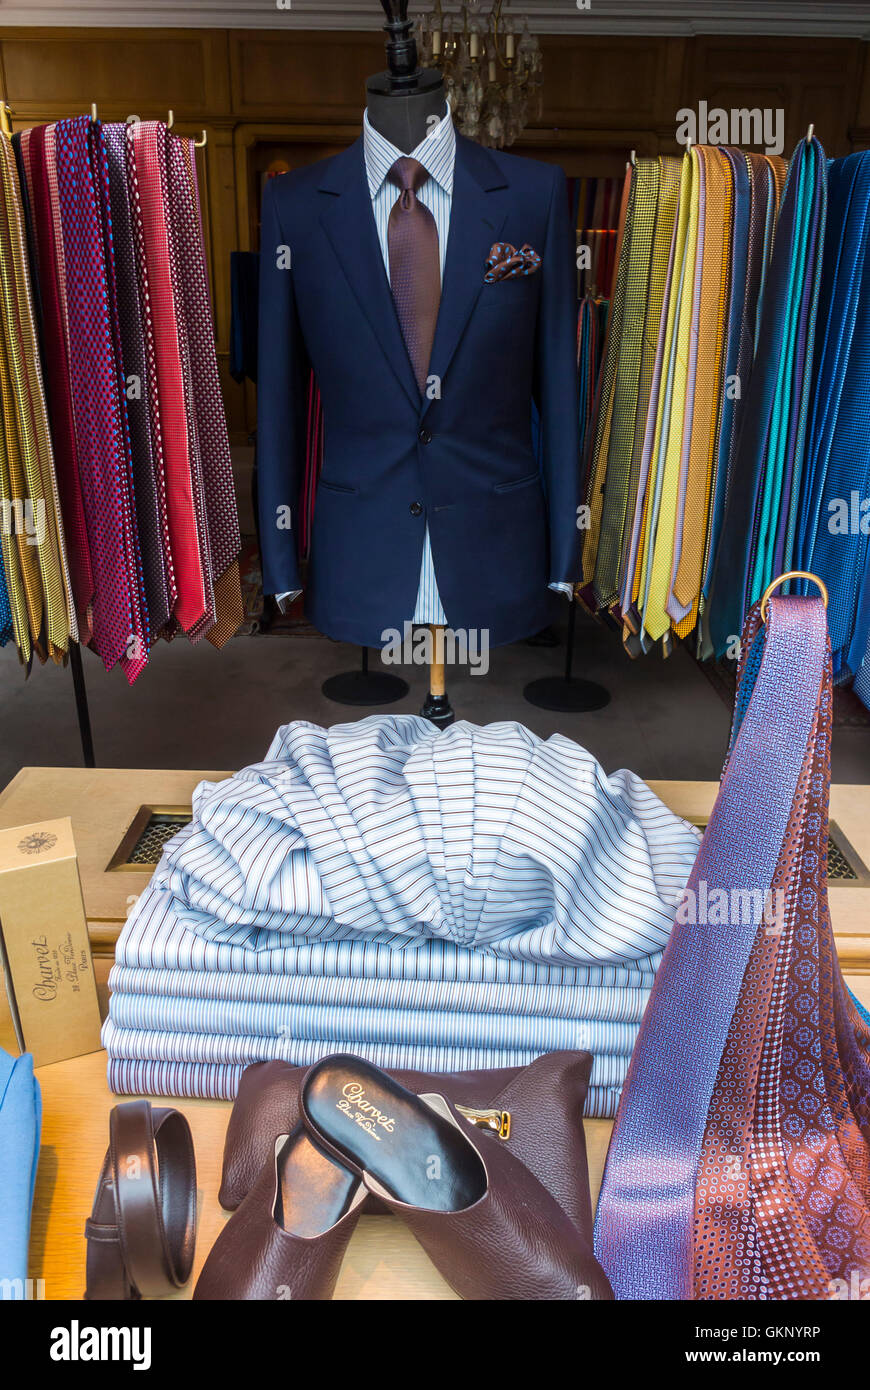 Paris, France, Luxury Shopping, Men&#39;s Clothing Accessories Store Stock Photo: 115423498 - Alamy